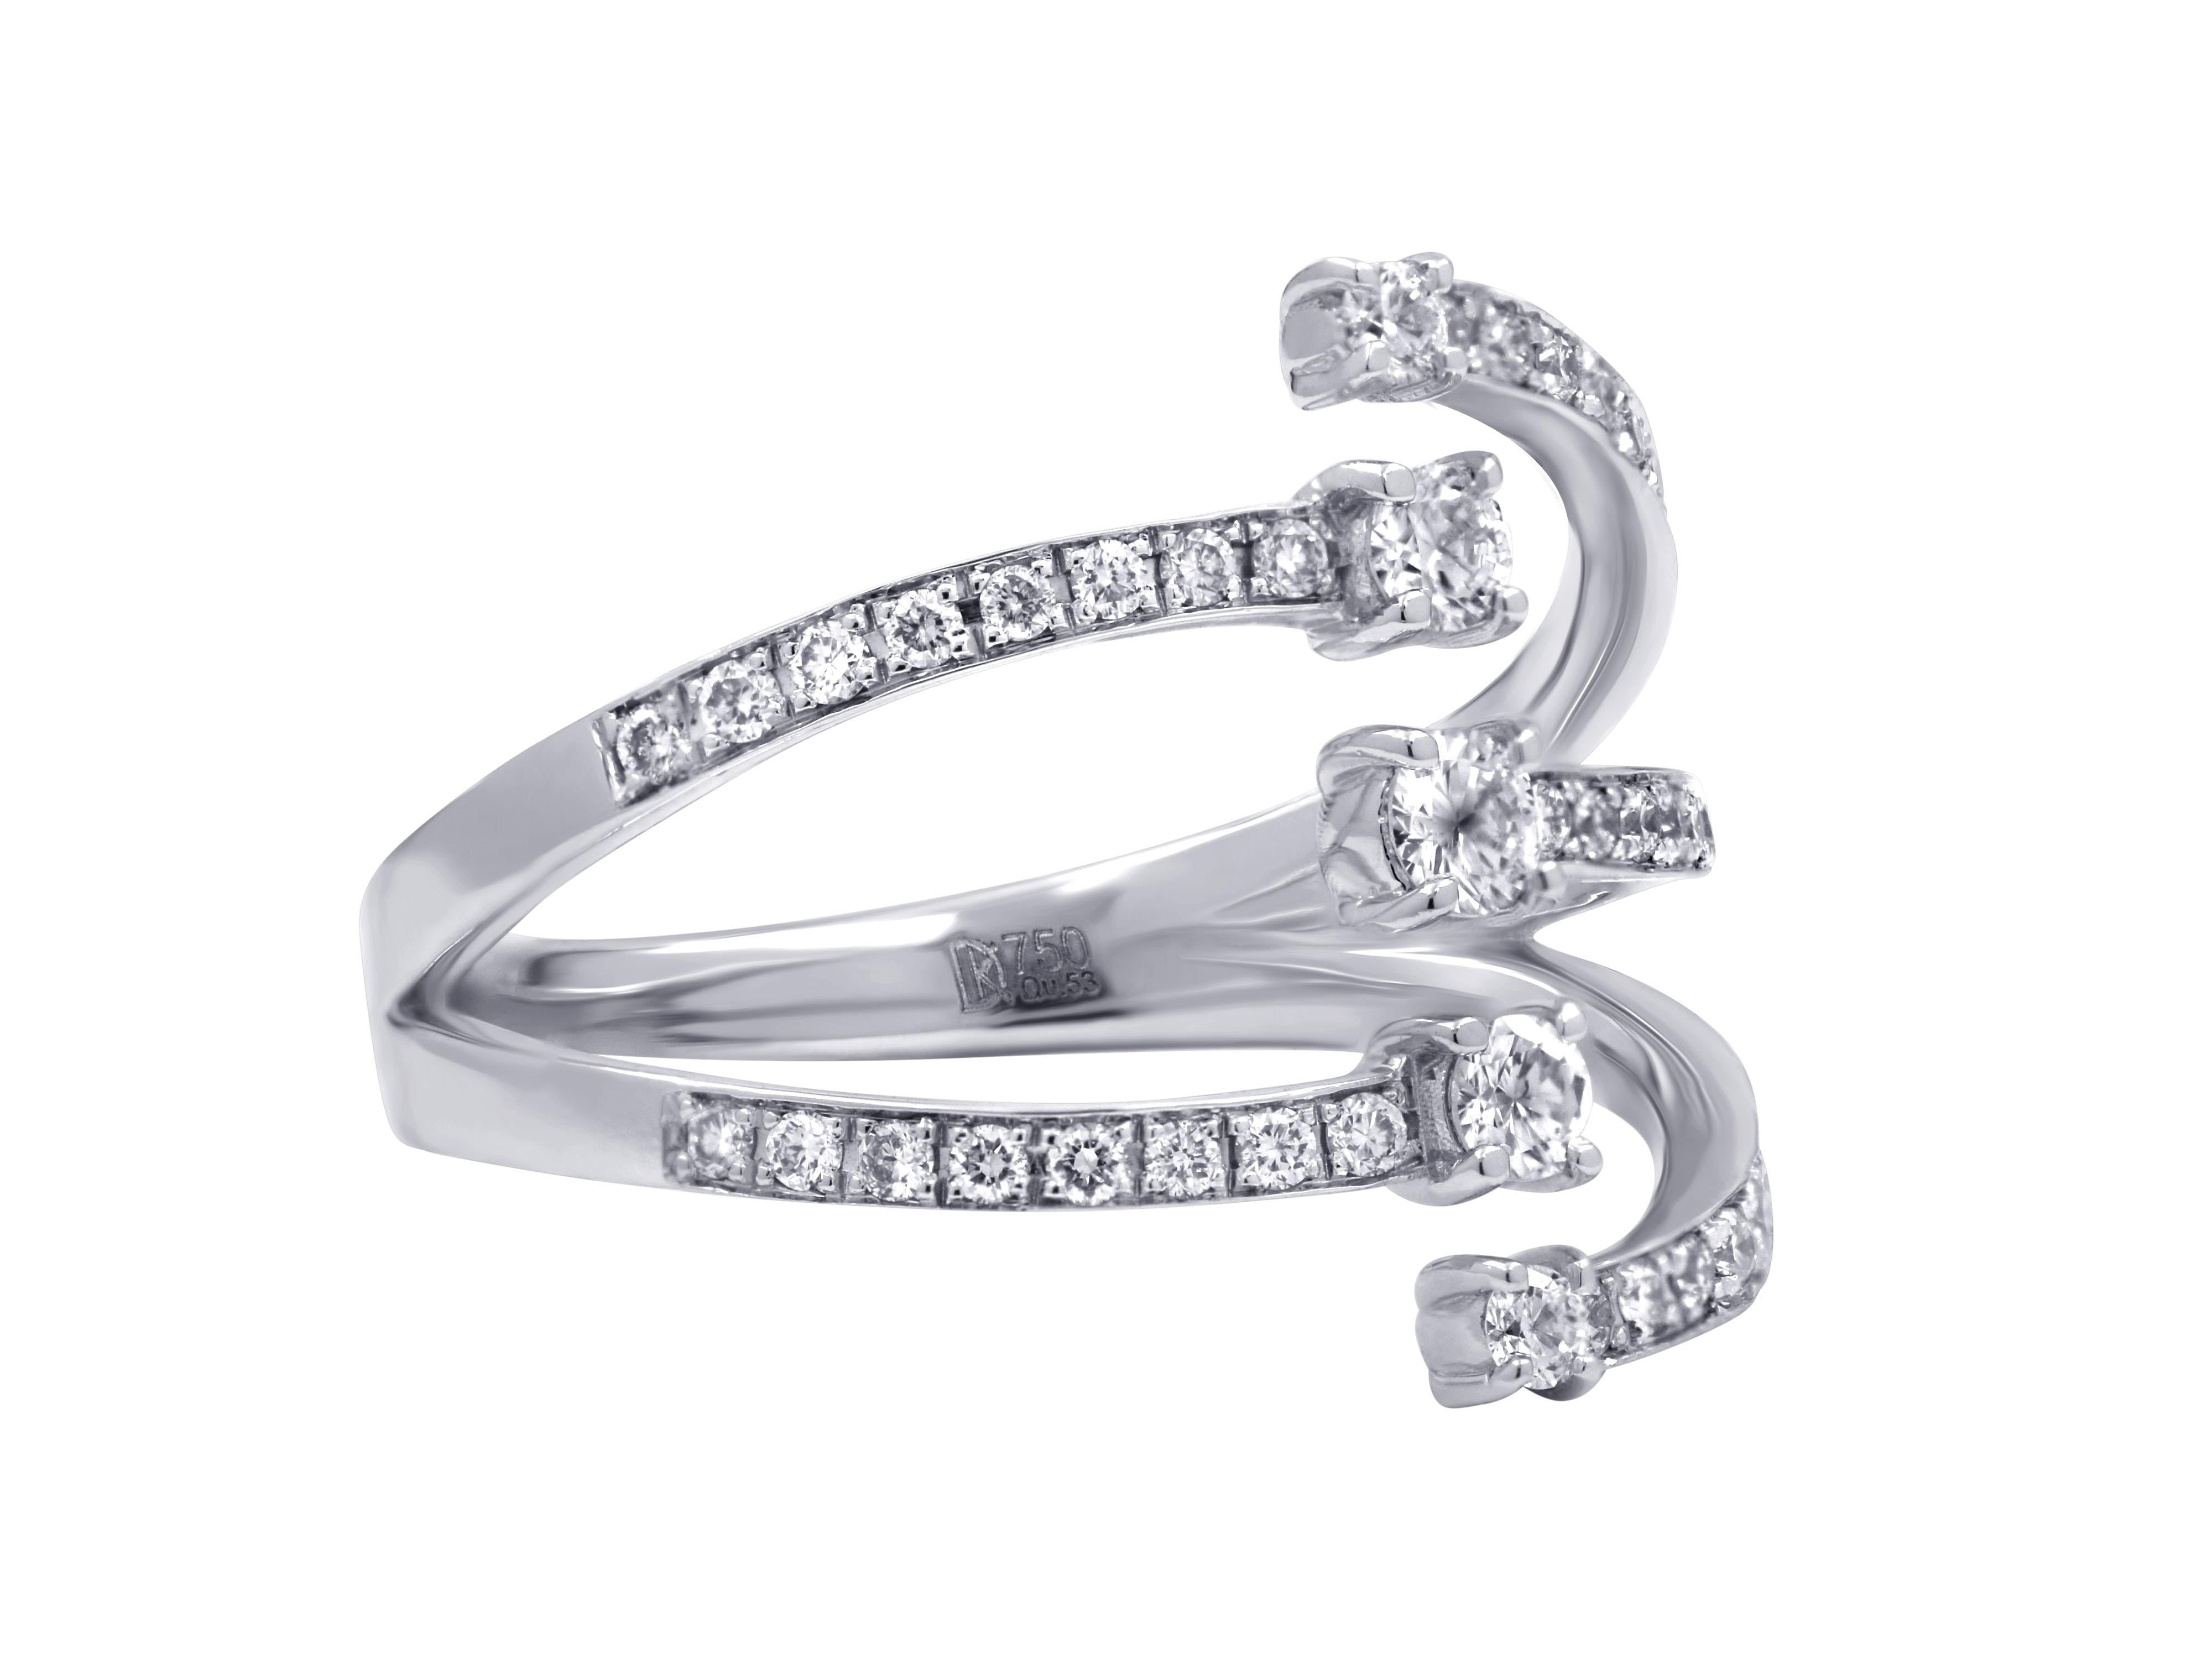 Modern ring in 18k white gold with five brilliant cut diamonds total 0.59 carats.

Width: 0.669”, 1.7cm